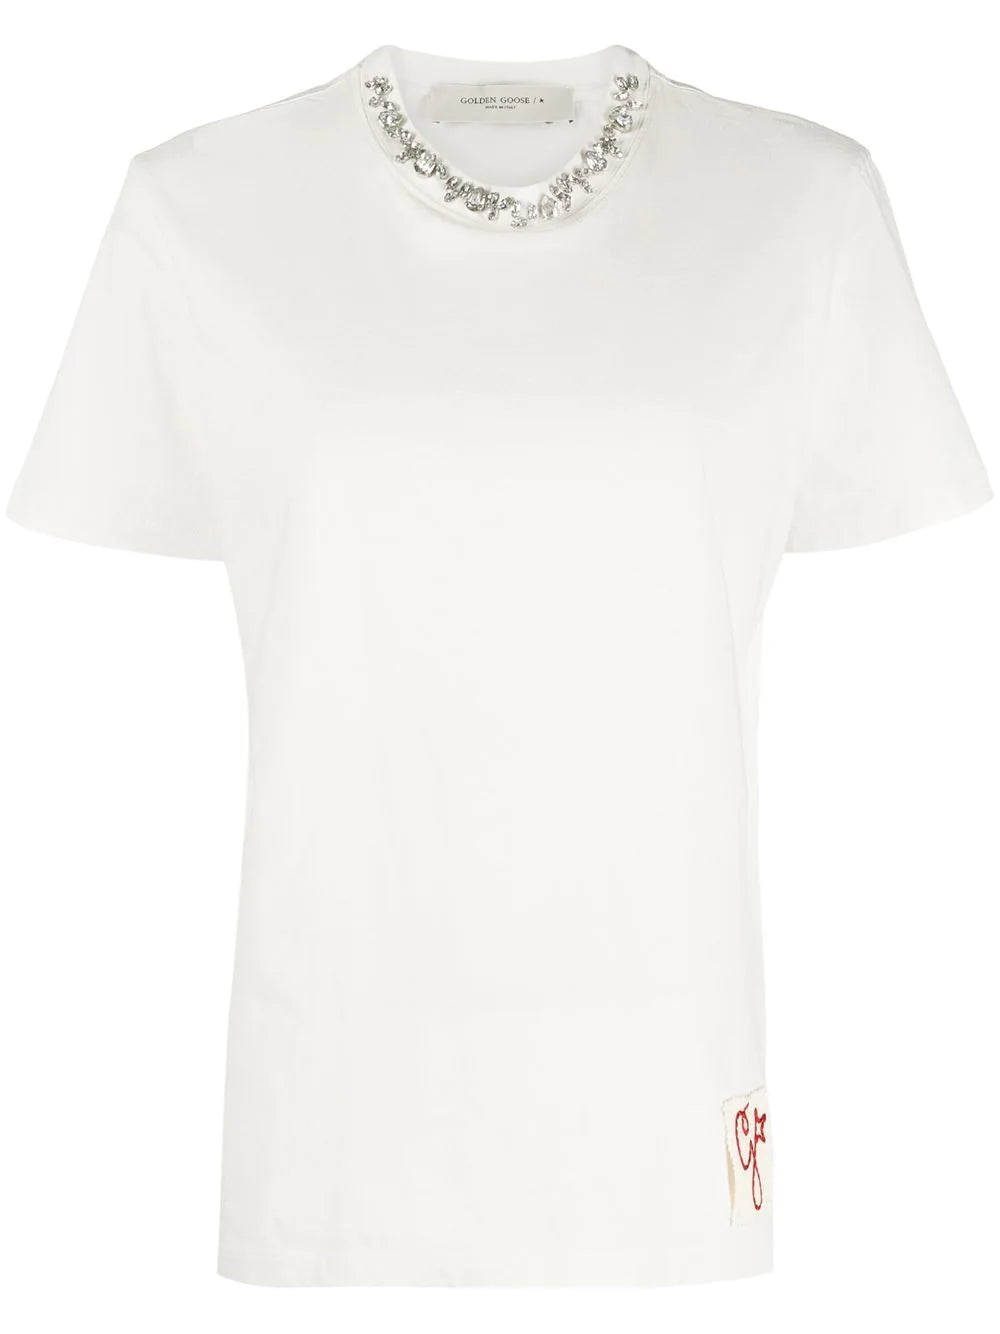 T-shirt in white with cabochon crystals